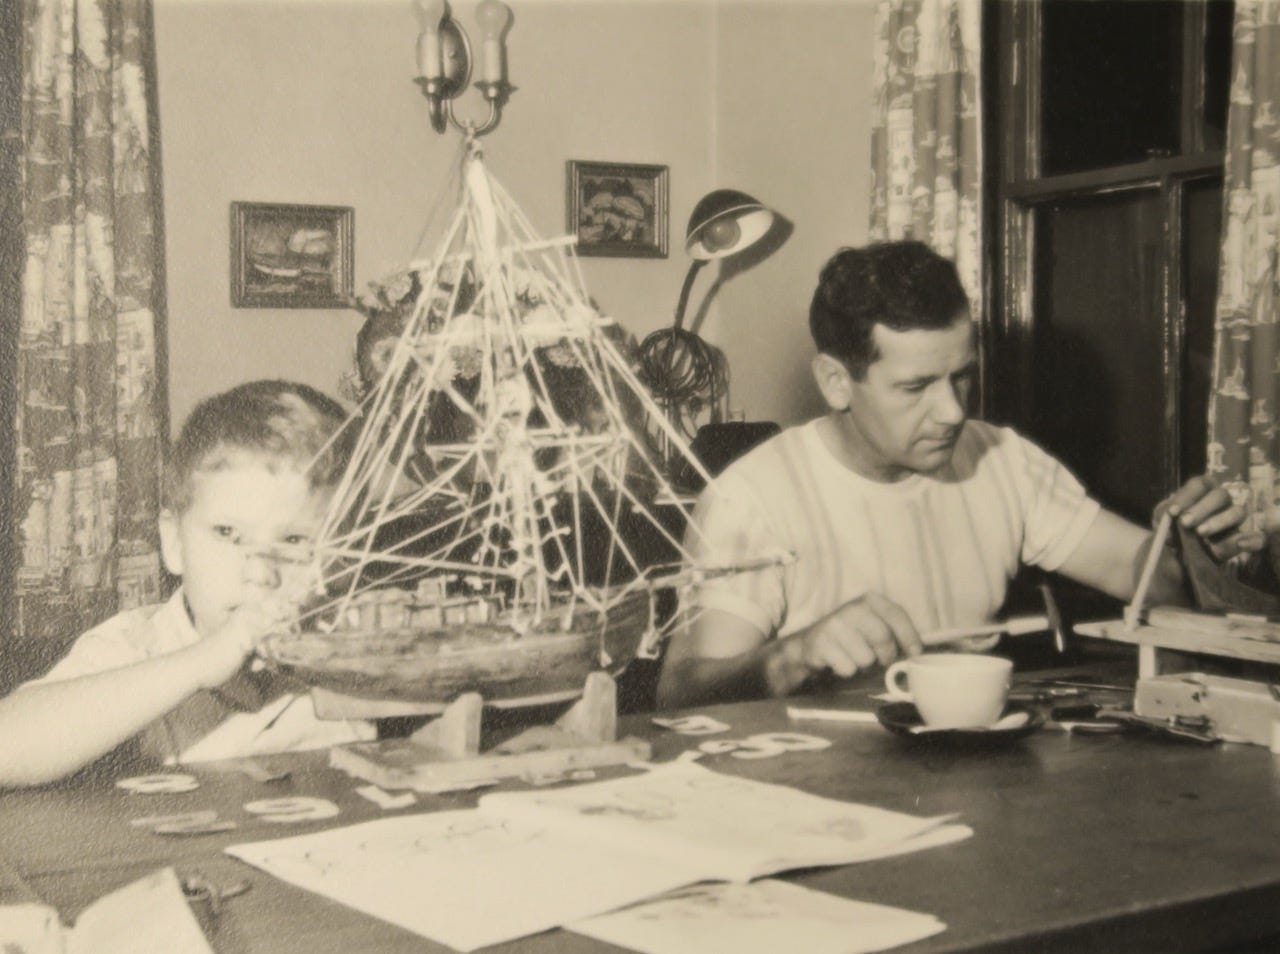 A person and a child sitting at a table with a model ship

Description automatically generated